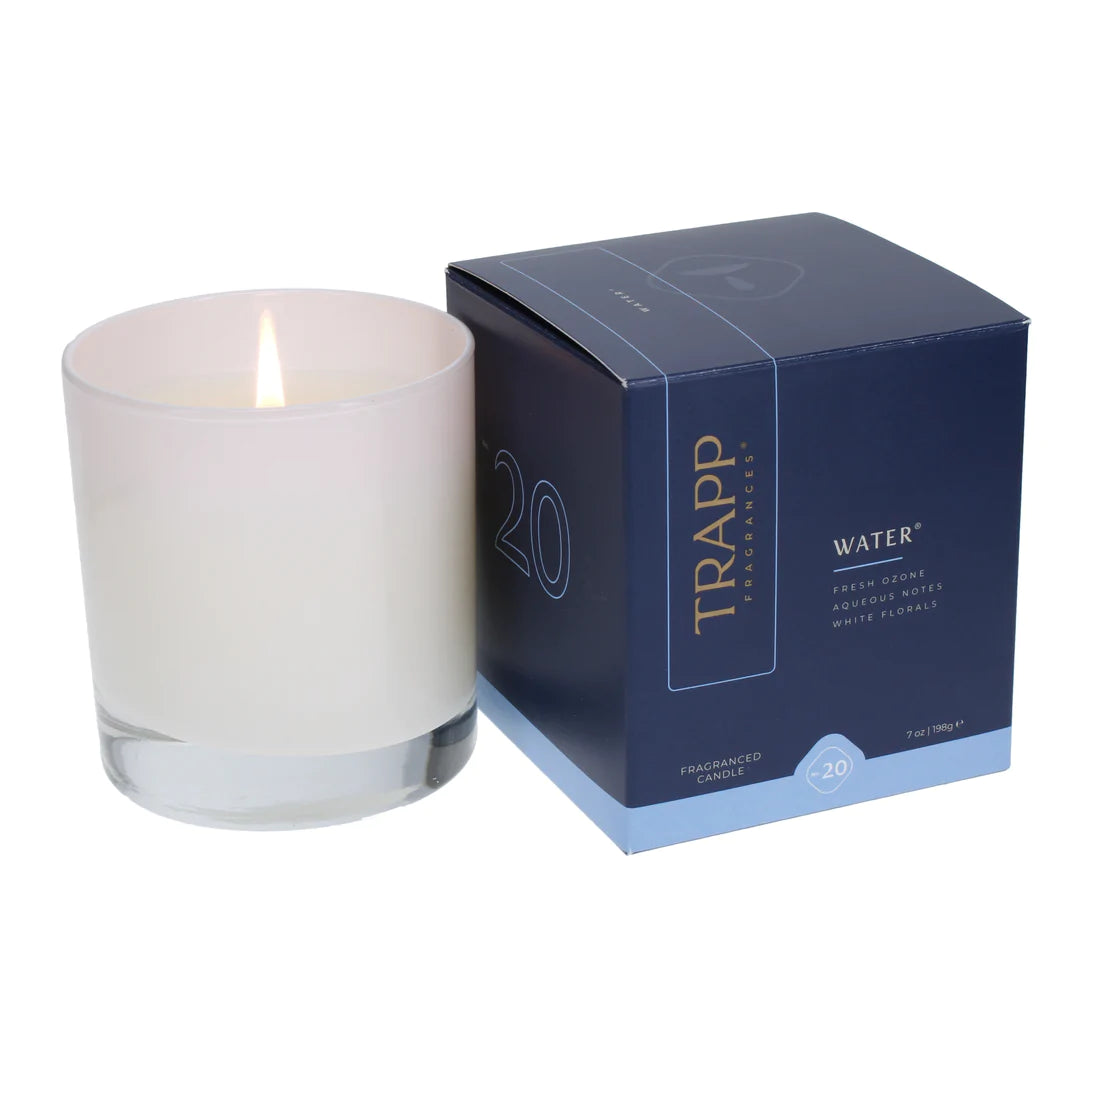 Water Trapp Candle